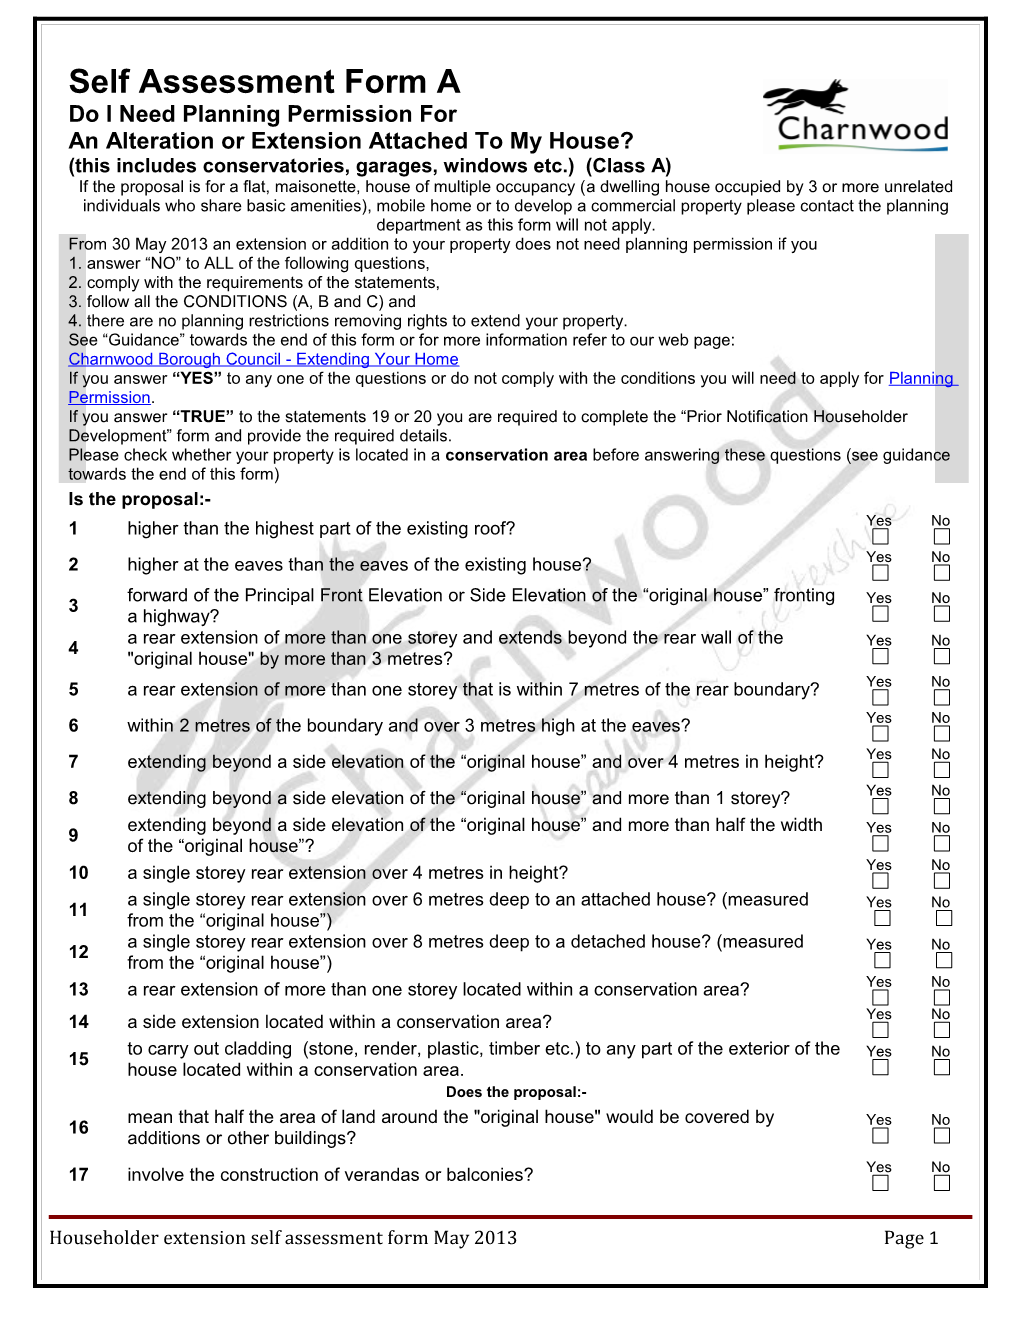 Householder Extension Self Assessment Form May 2013Page 1